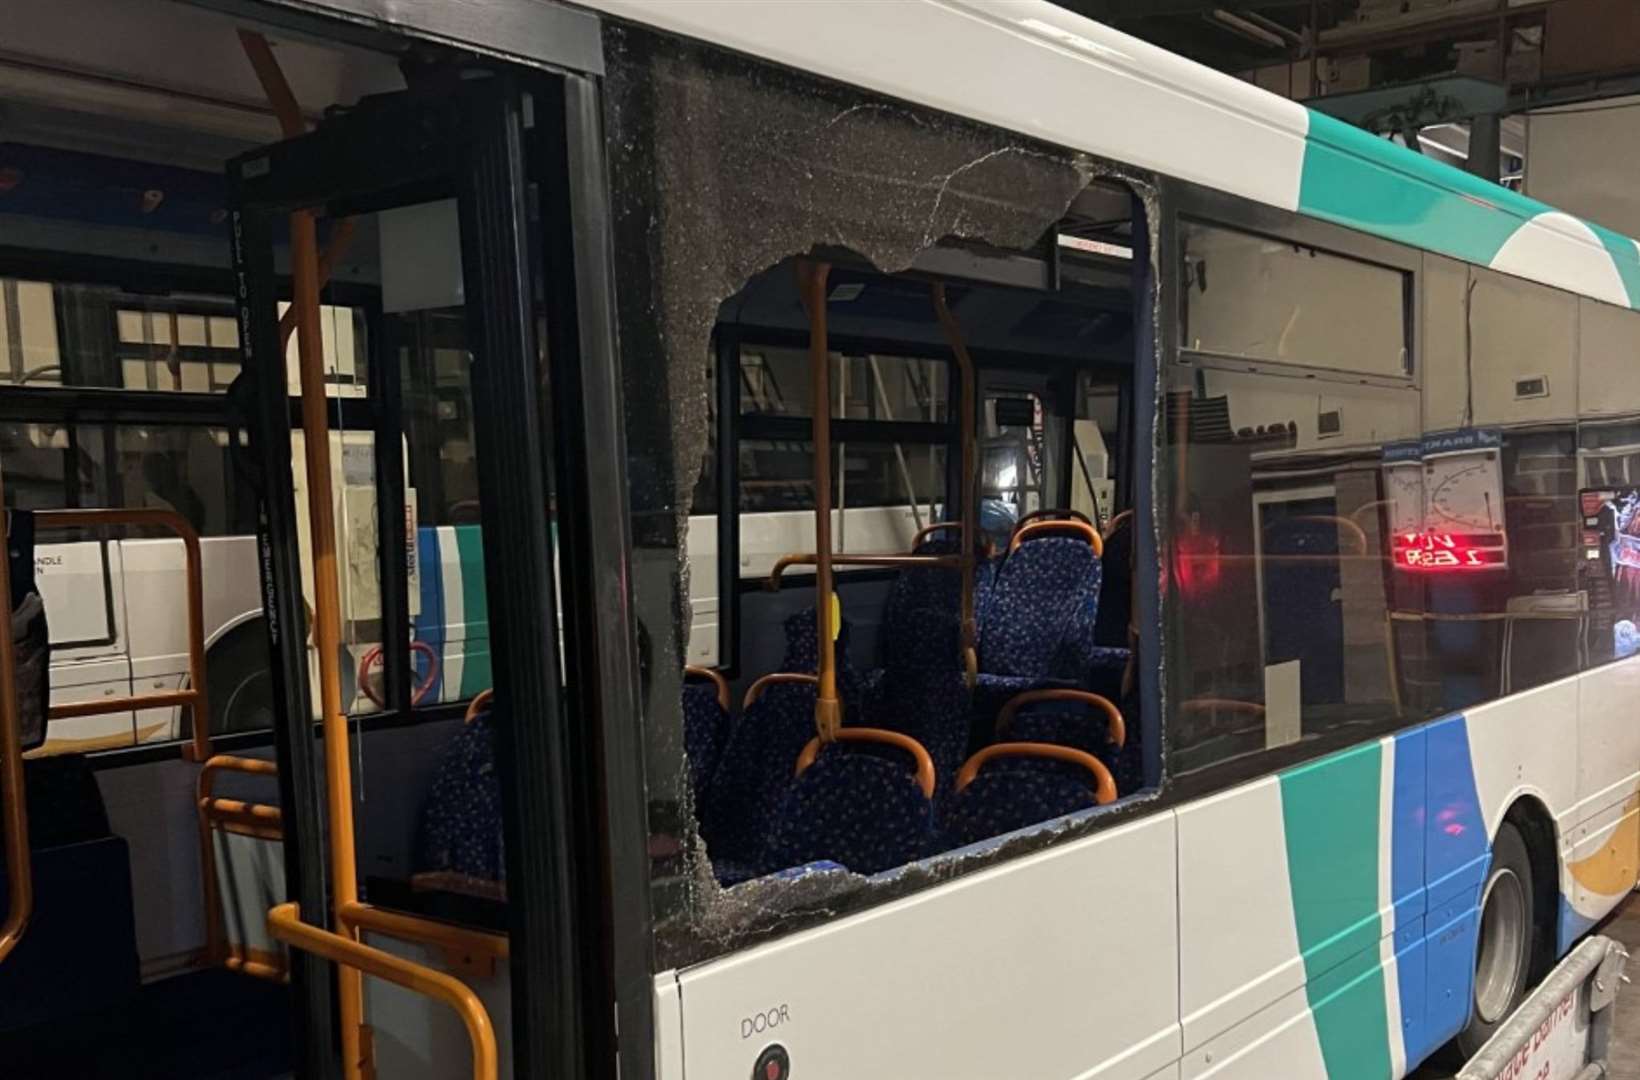 Stagecoach buses have been targeted in Kennington in recent months